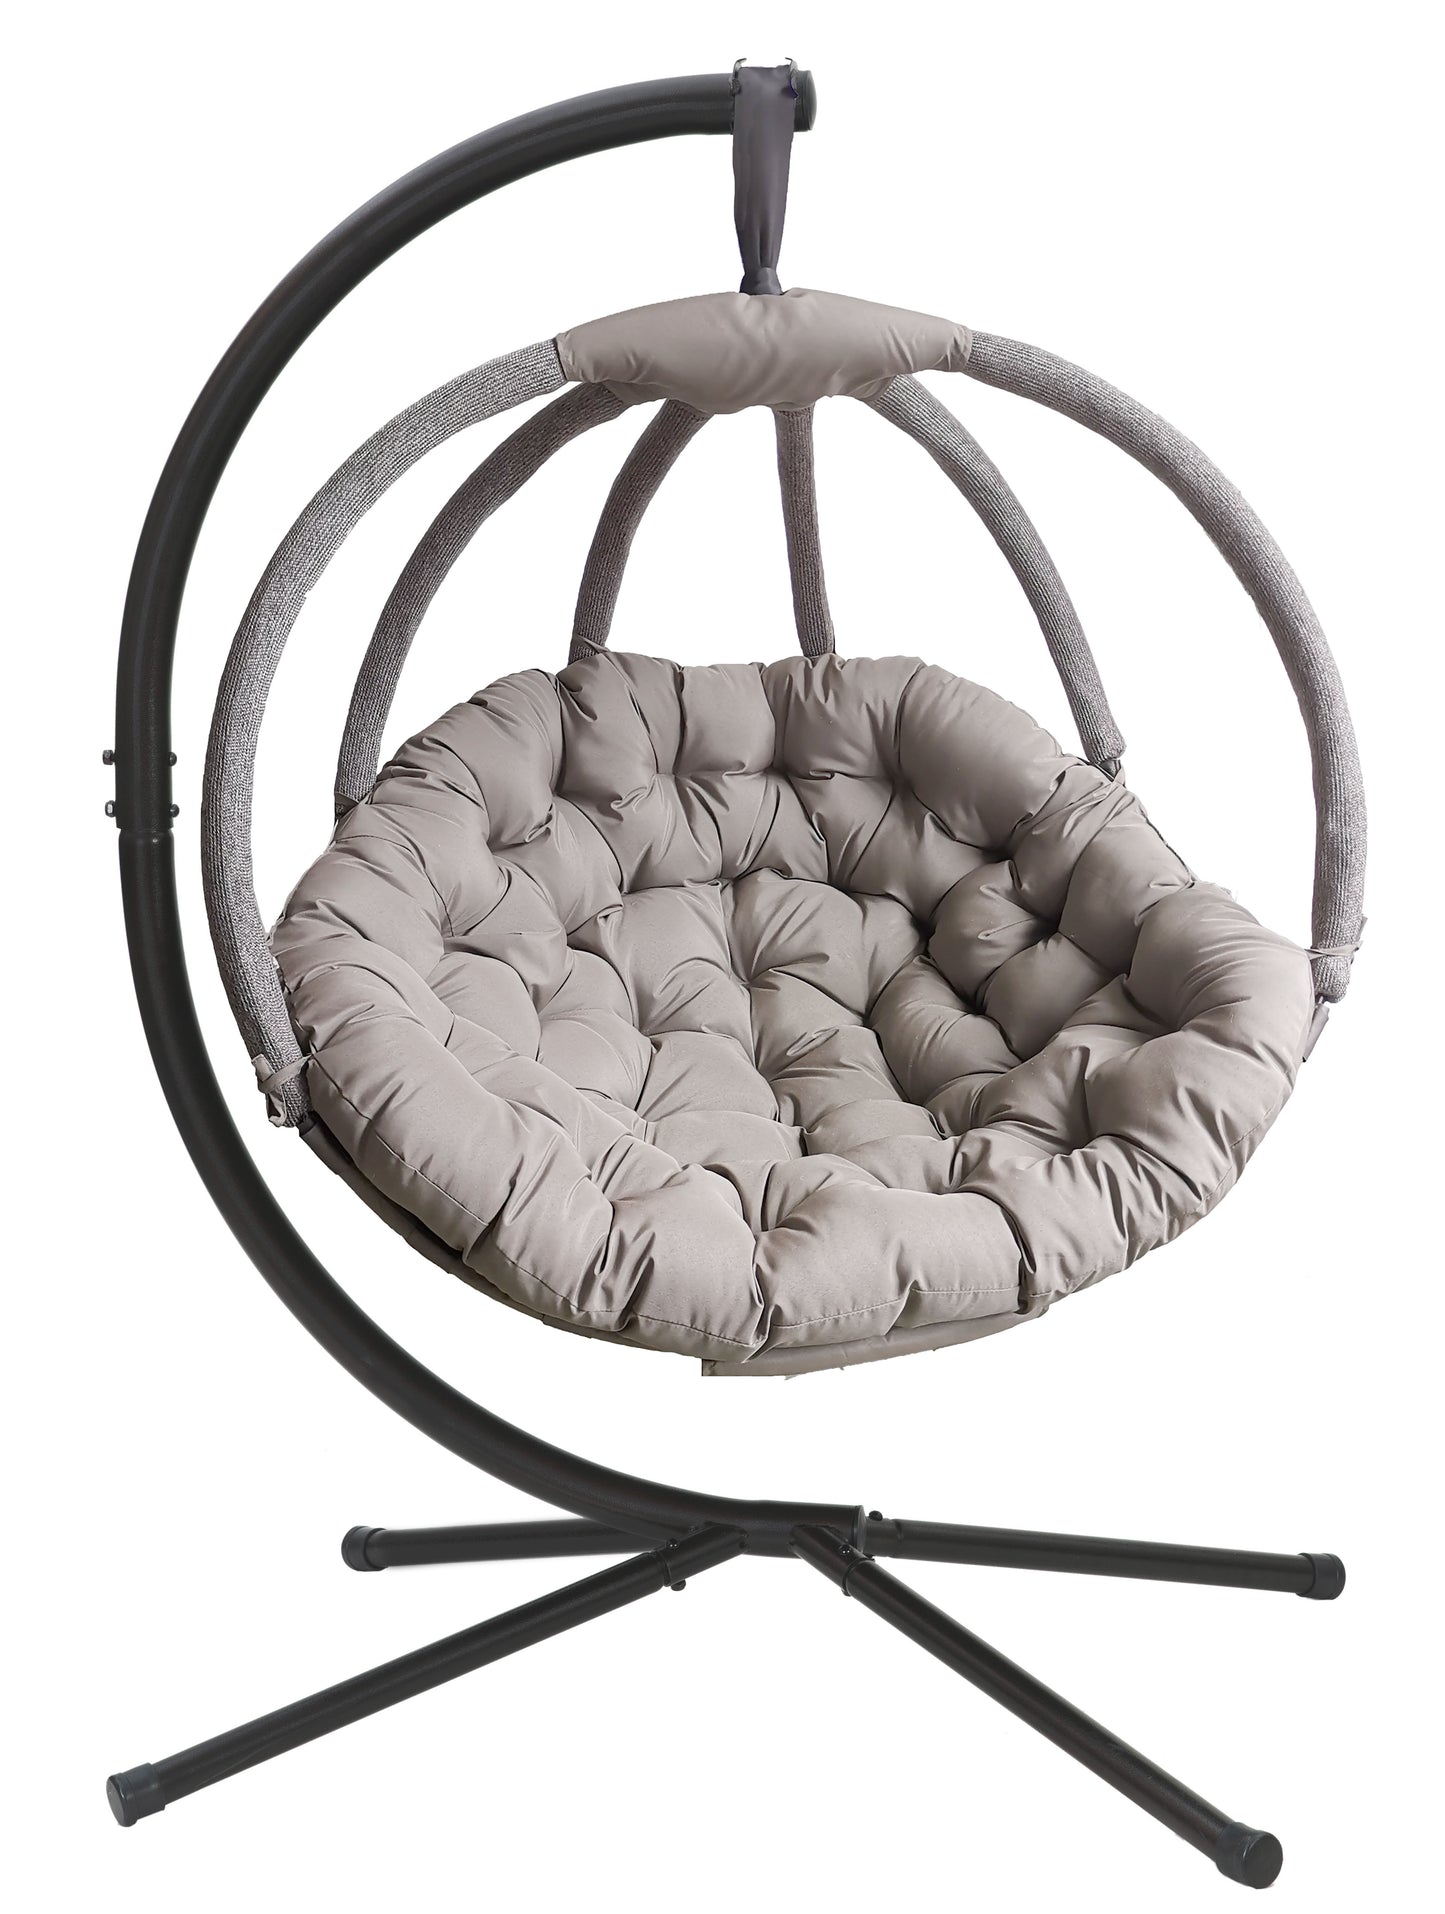 FlowerHouse Hanging Ball Chair with Stand - Overland - in color sand front view